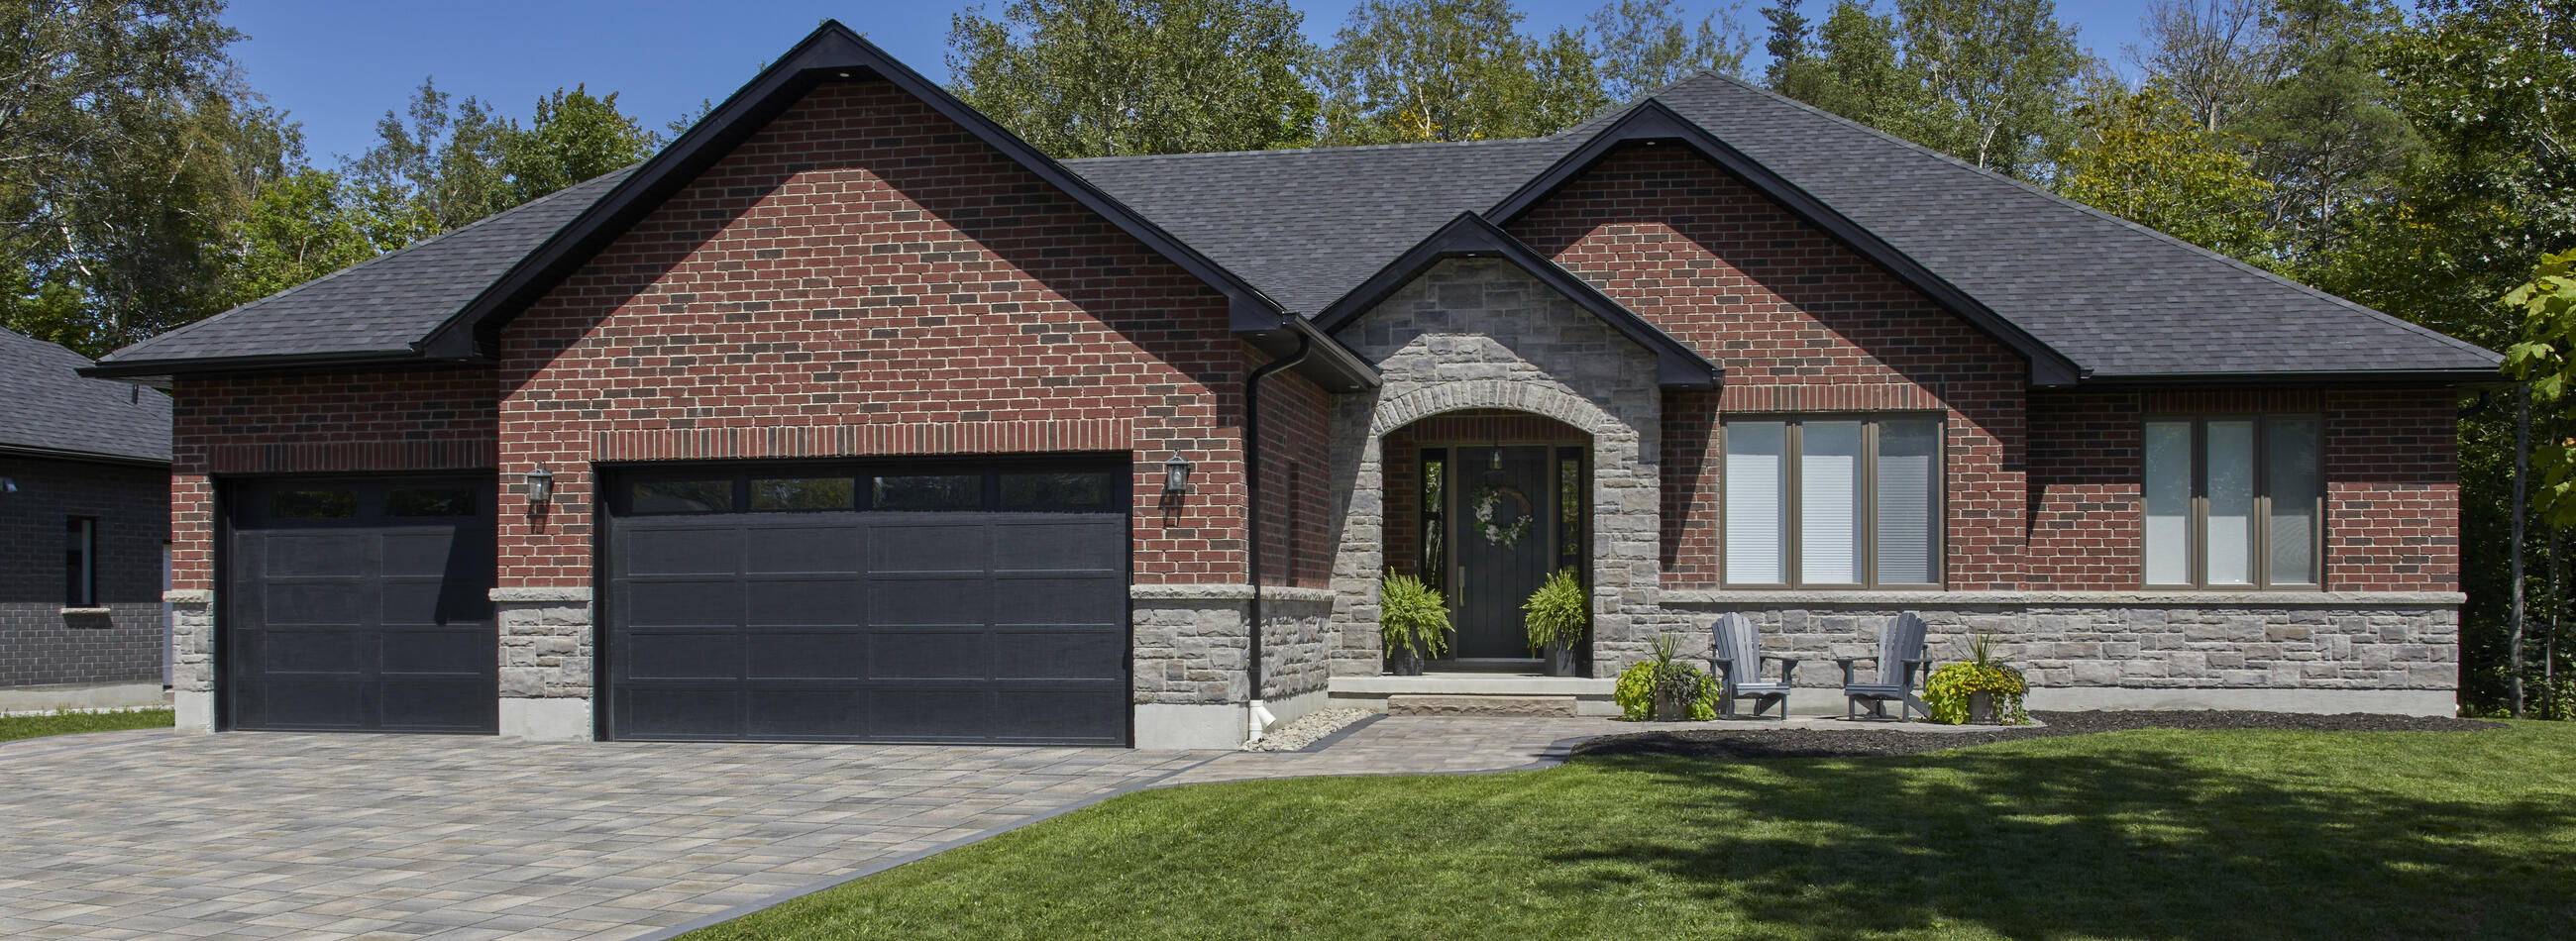 house using Brampton Brick and Oaks Landscape products 